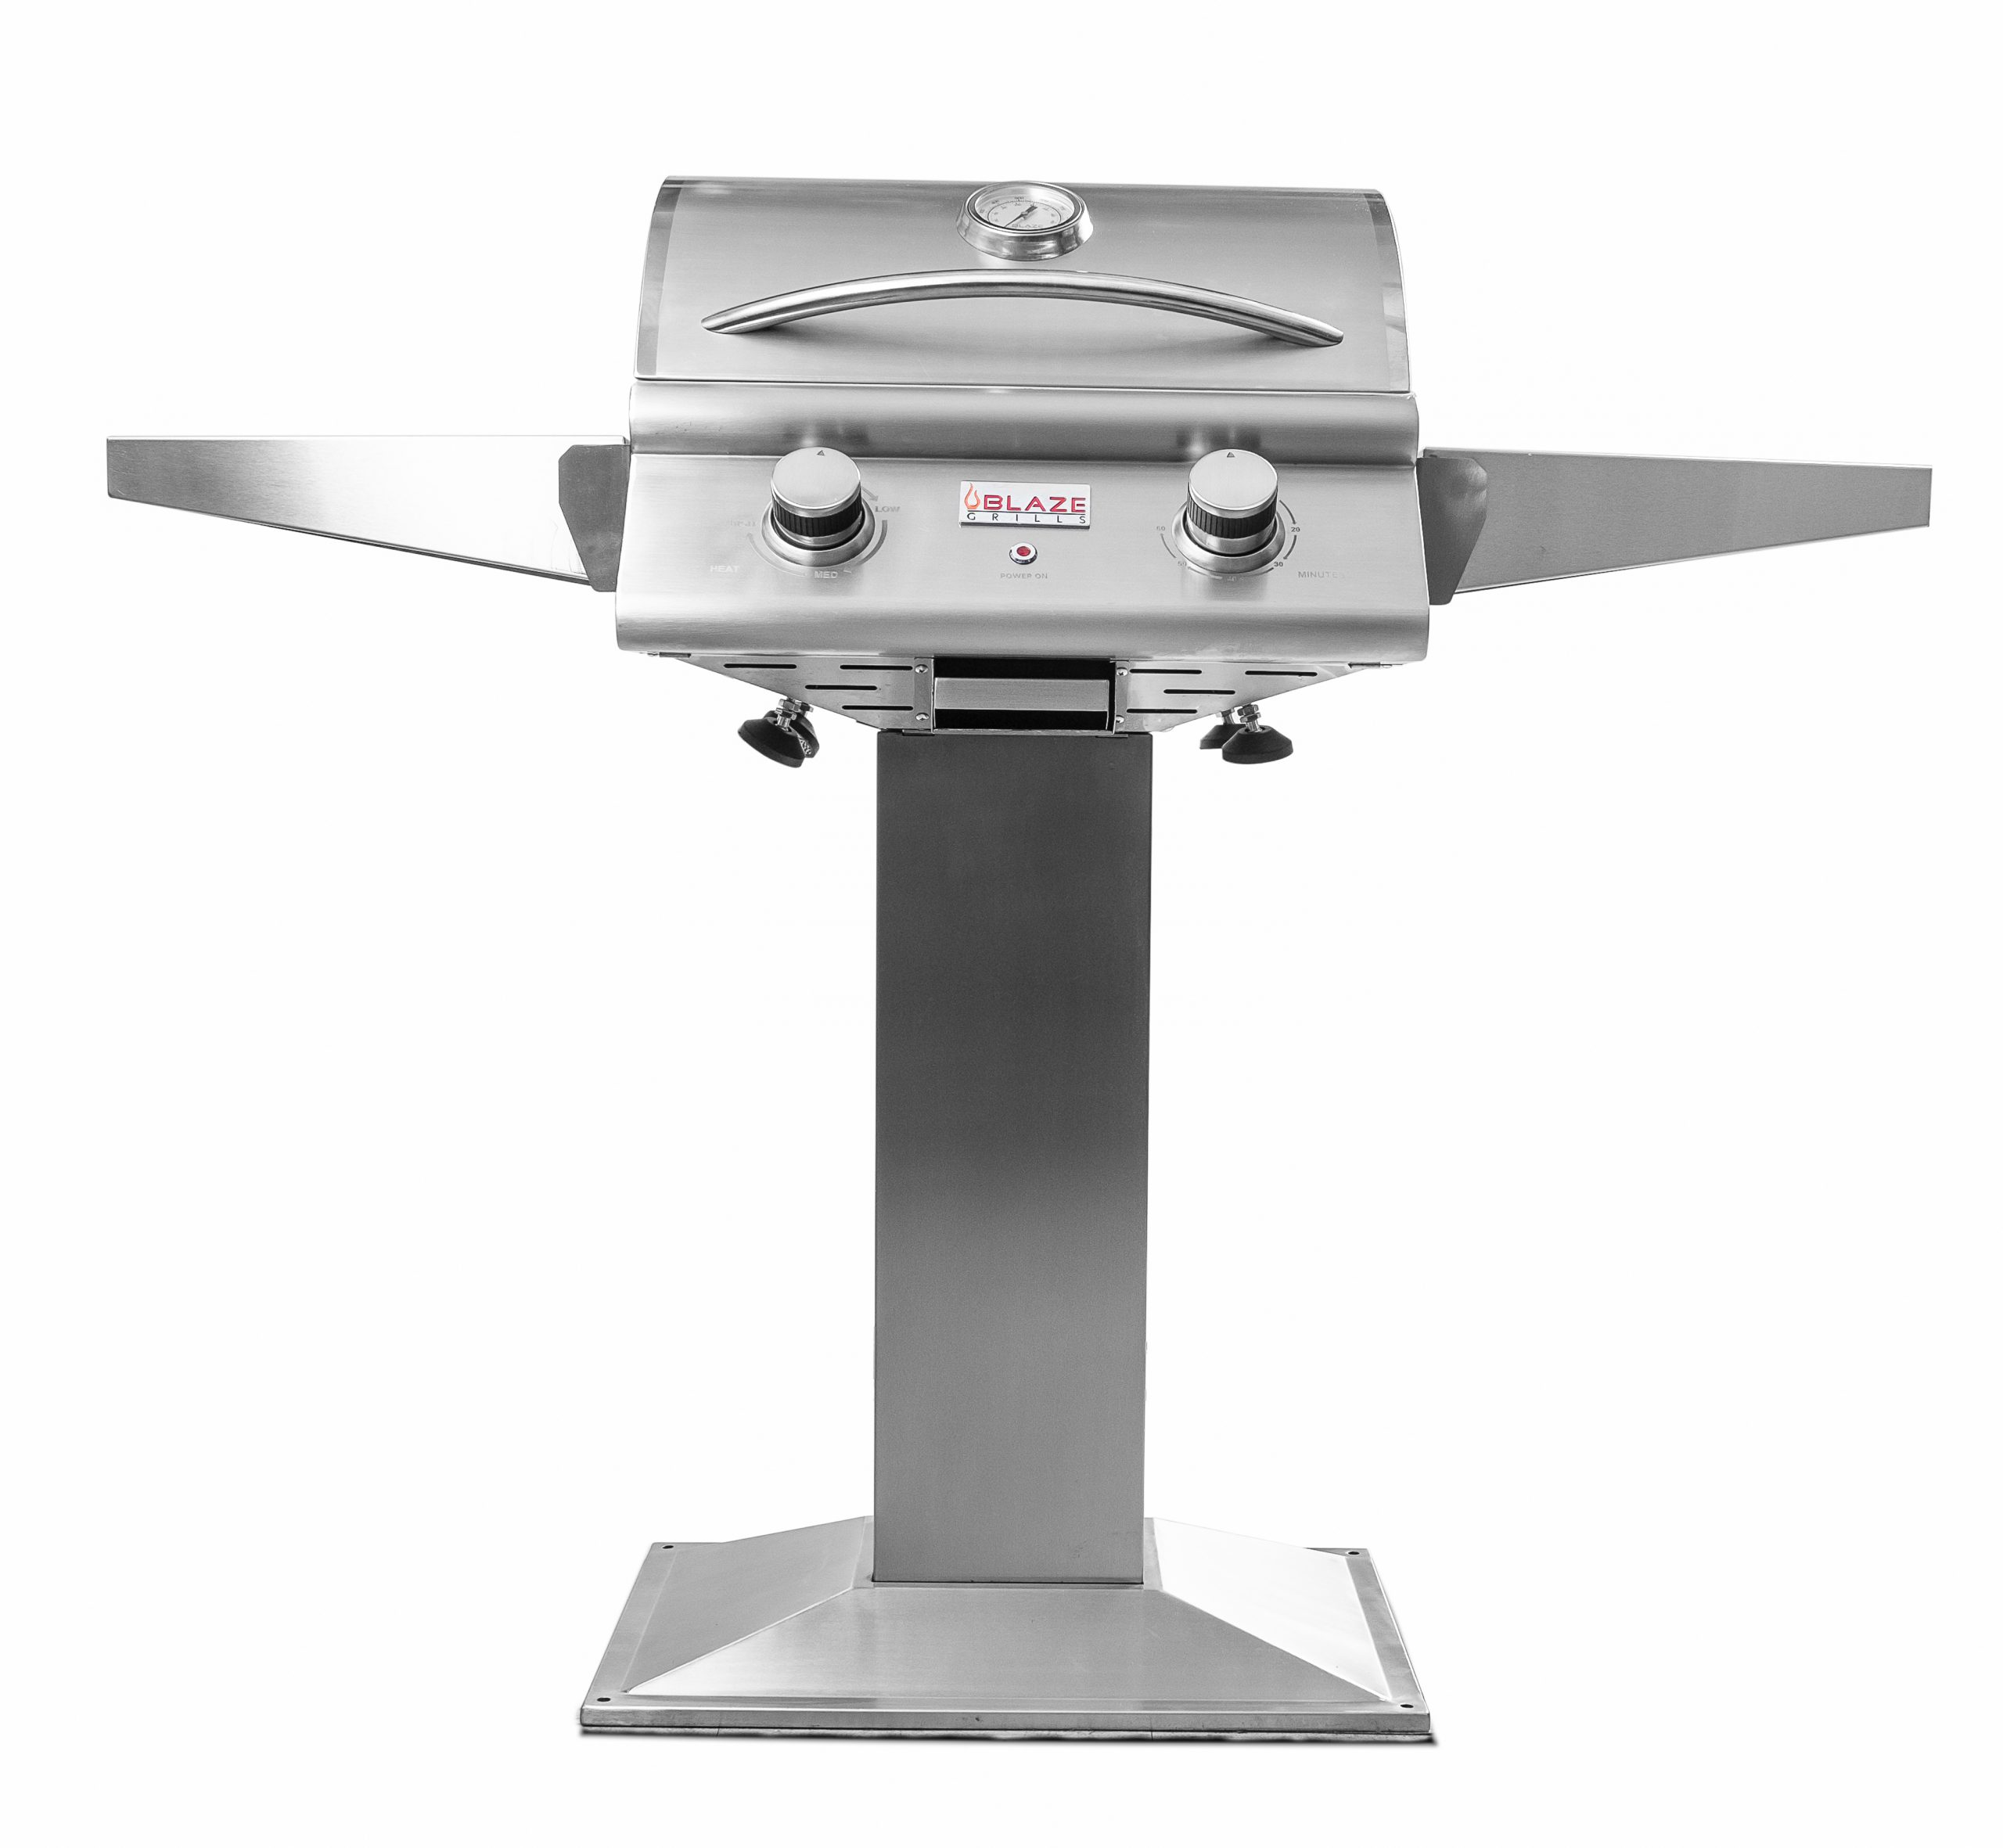 New Outdoor Electric Grills